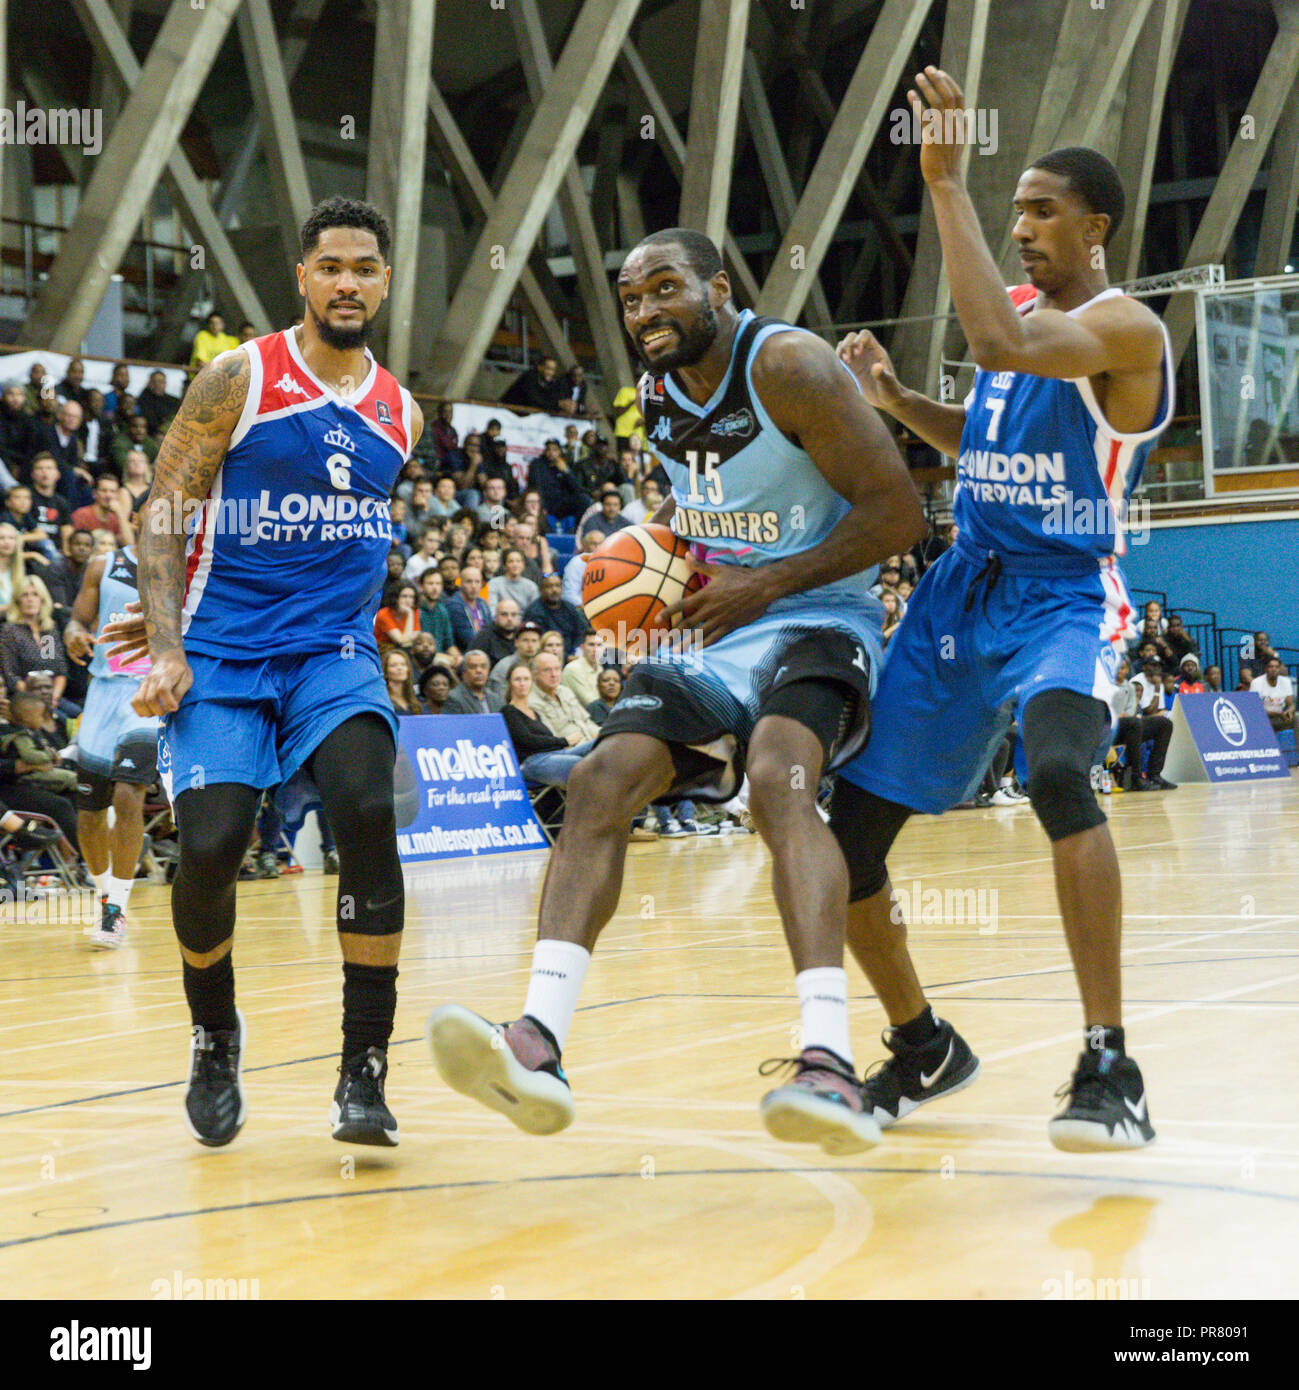 Crystal Palace, London, 29th Sep 2018. Surrey Captain Tayo Ogedengbe (15), breaks through the Royals defense.  New British Basketball League (BBL) team London City Royals win their debut home game 91:85 v Surrey Scorchers at the National Sports Centre in Crystal Palace, Southeast London. Credit: Imageplotter News and Sports/Alamy Live News Stock Photo